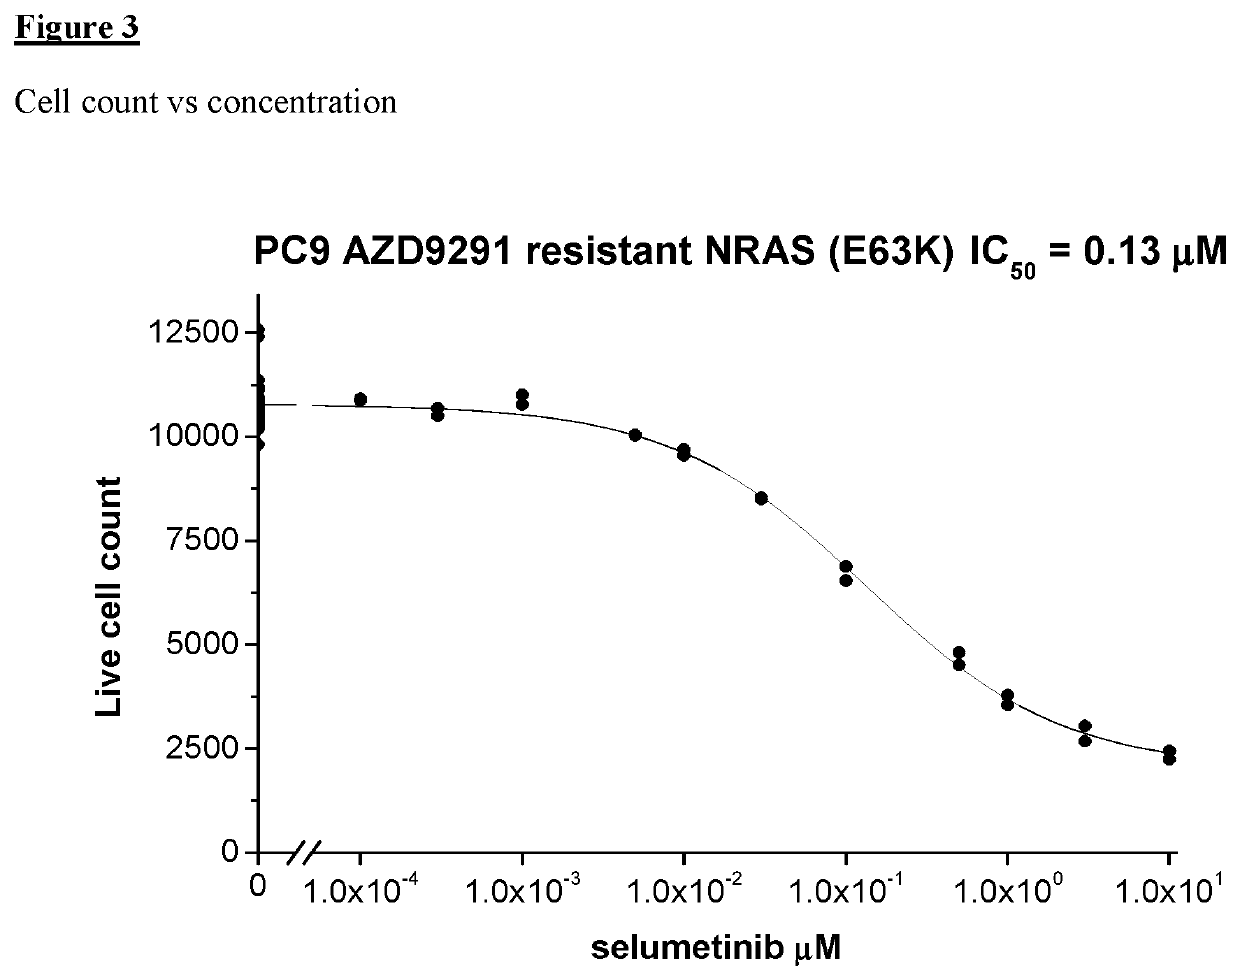 Combination of EGFR Inhibitor and MEK Inhibitor for use in the treatment of NRAS mutated cancer